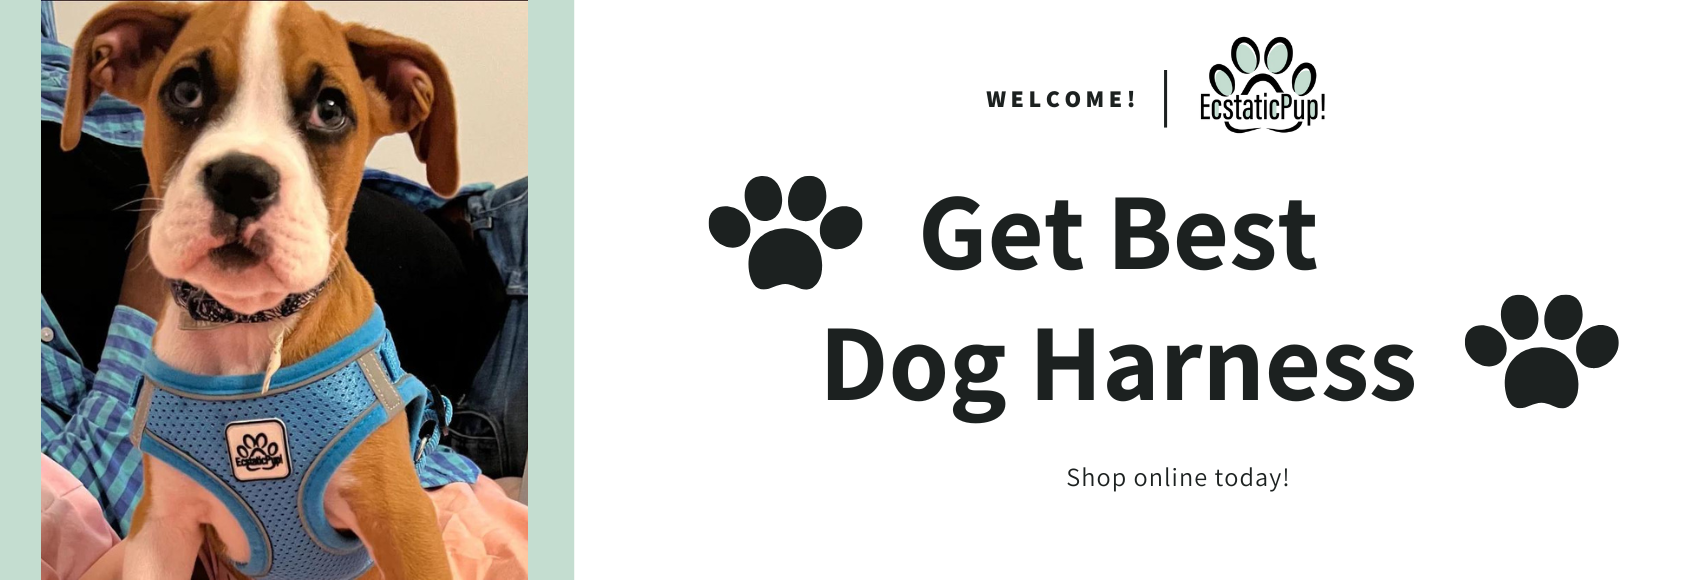 Upgrade Your Dog's Lifestyle with These Amazing Products